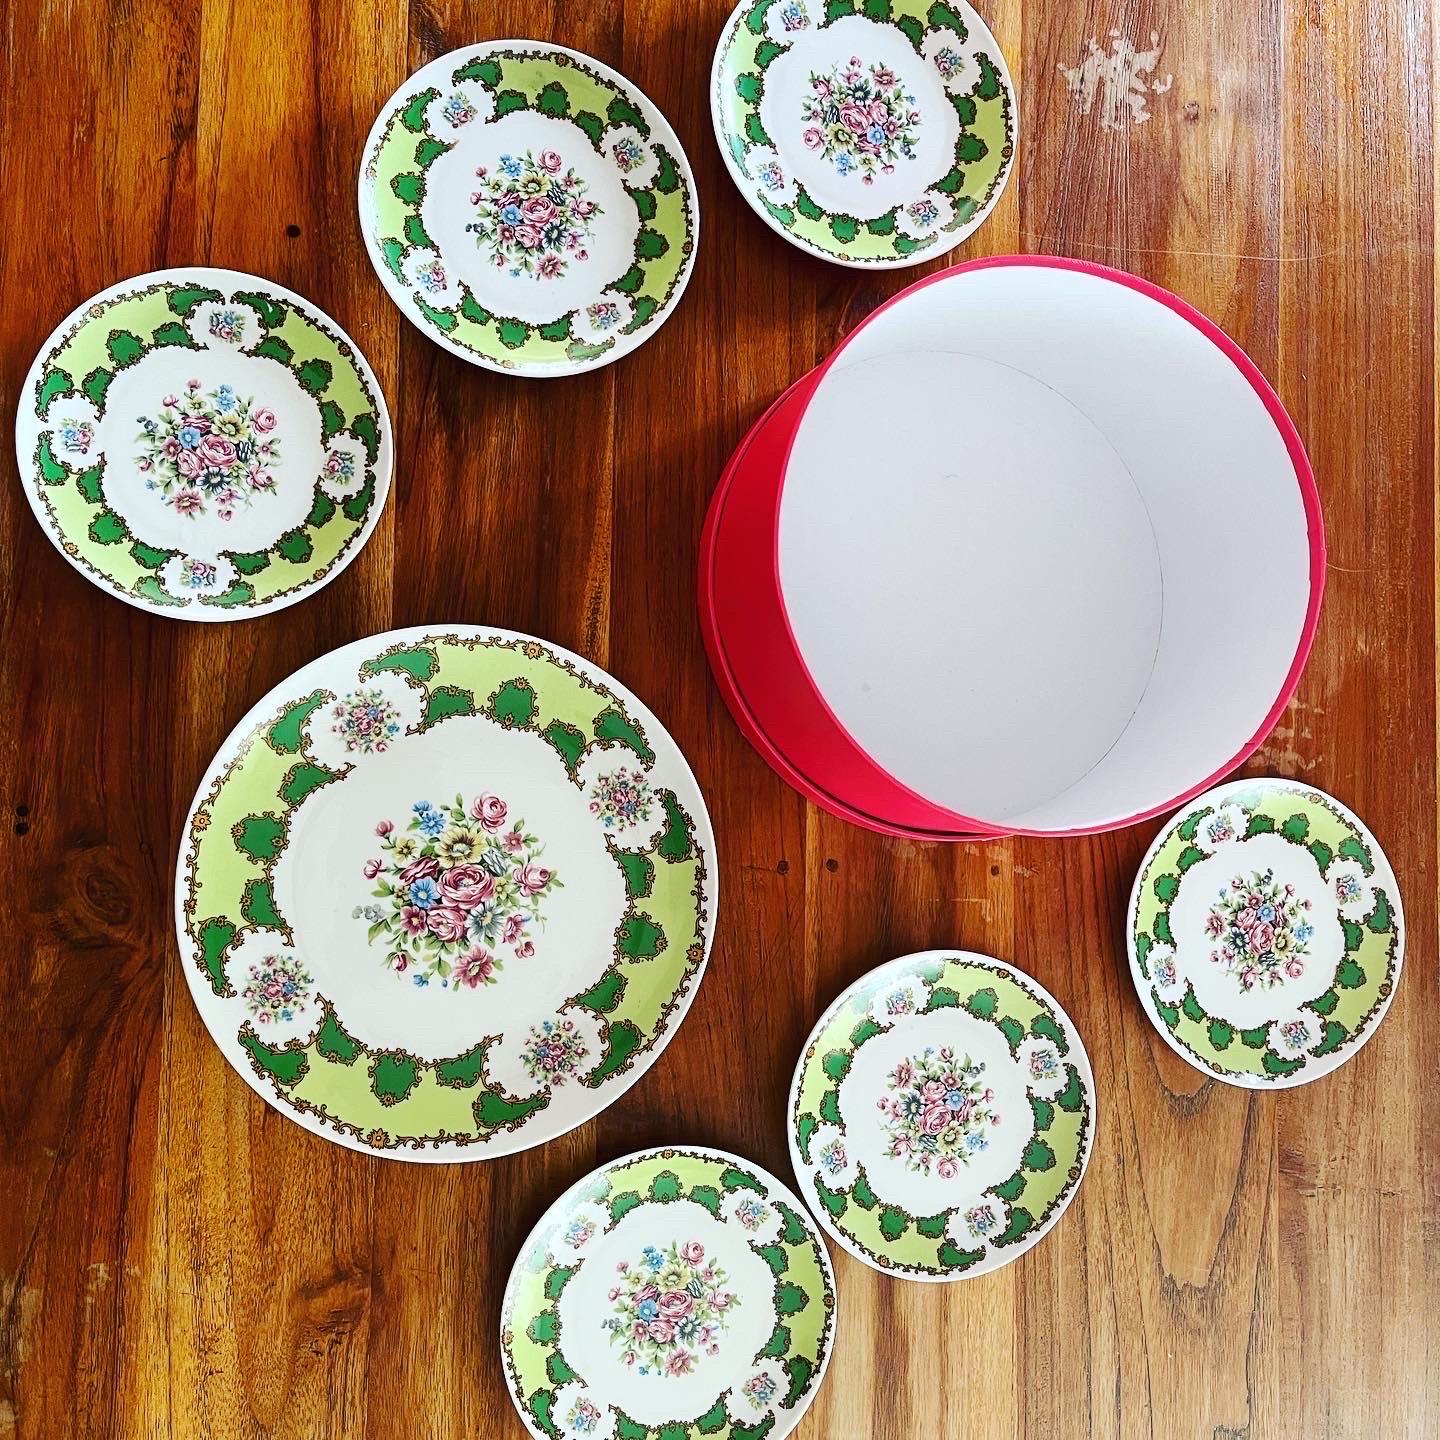 Early 20th Century Coordinated Dessert Green Decorated Porcelain '900 -Antiques' For Sale